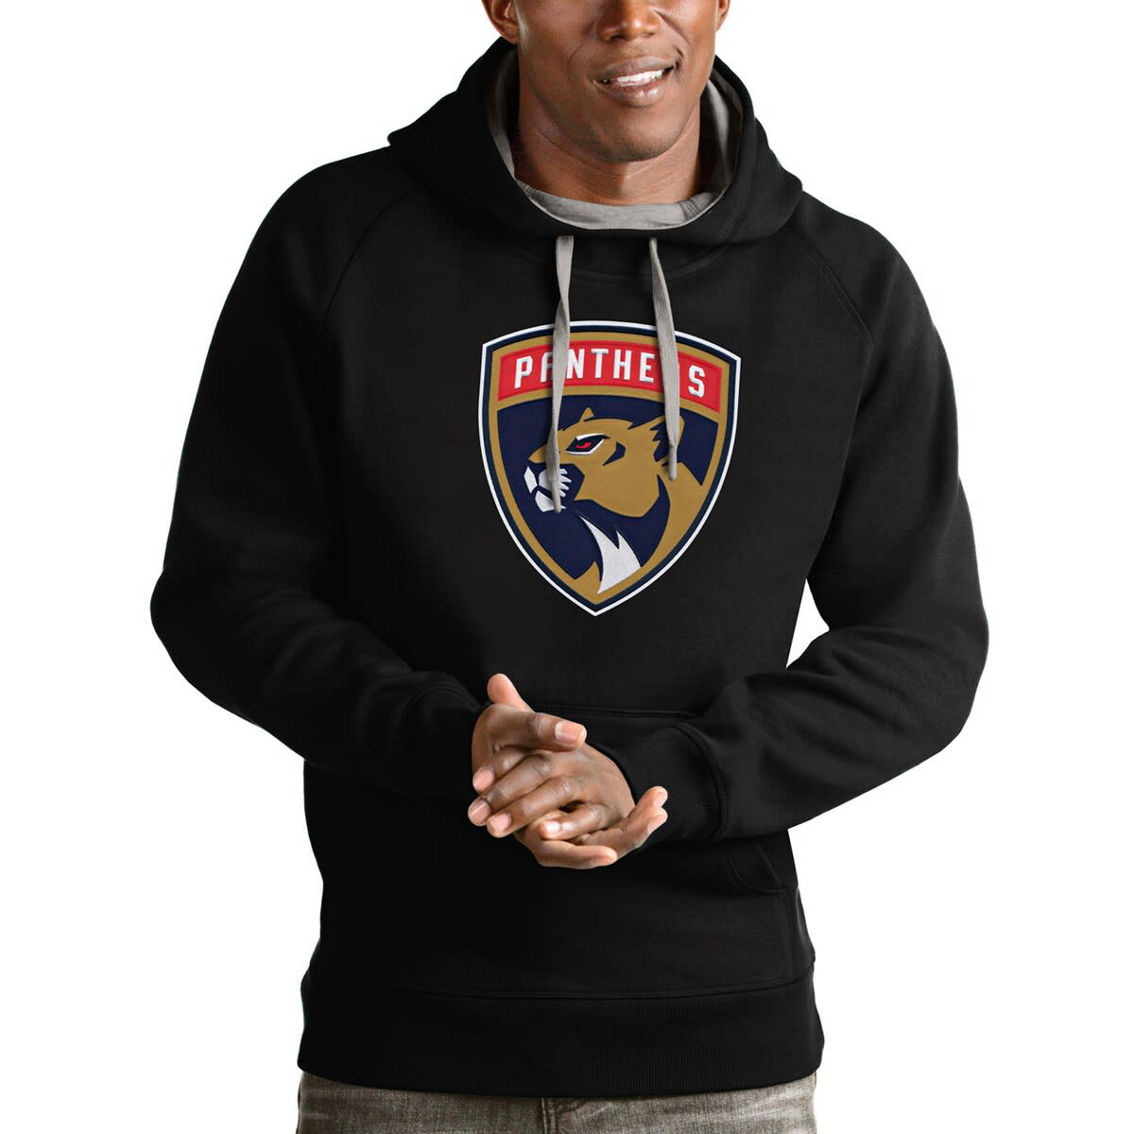 Antigua Men's Black Florida Panthers Logo Victory Pullover Hoodie - Image 2 of 2